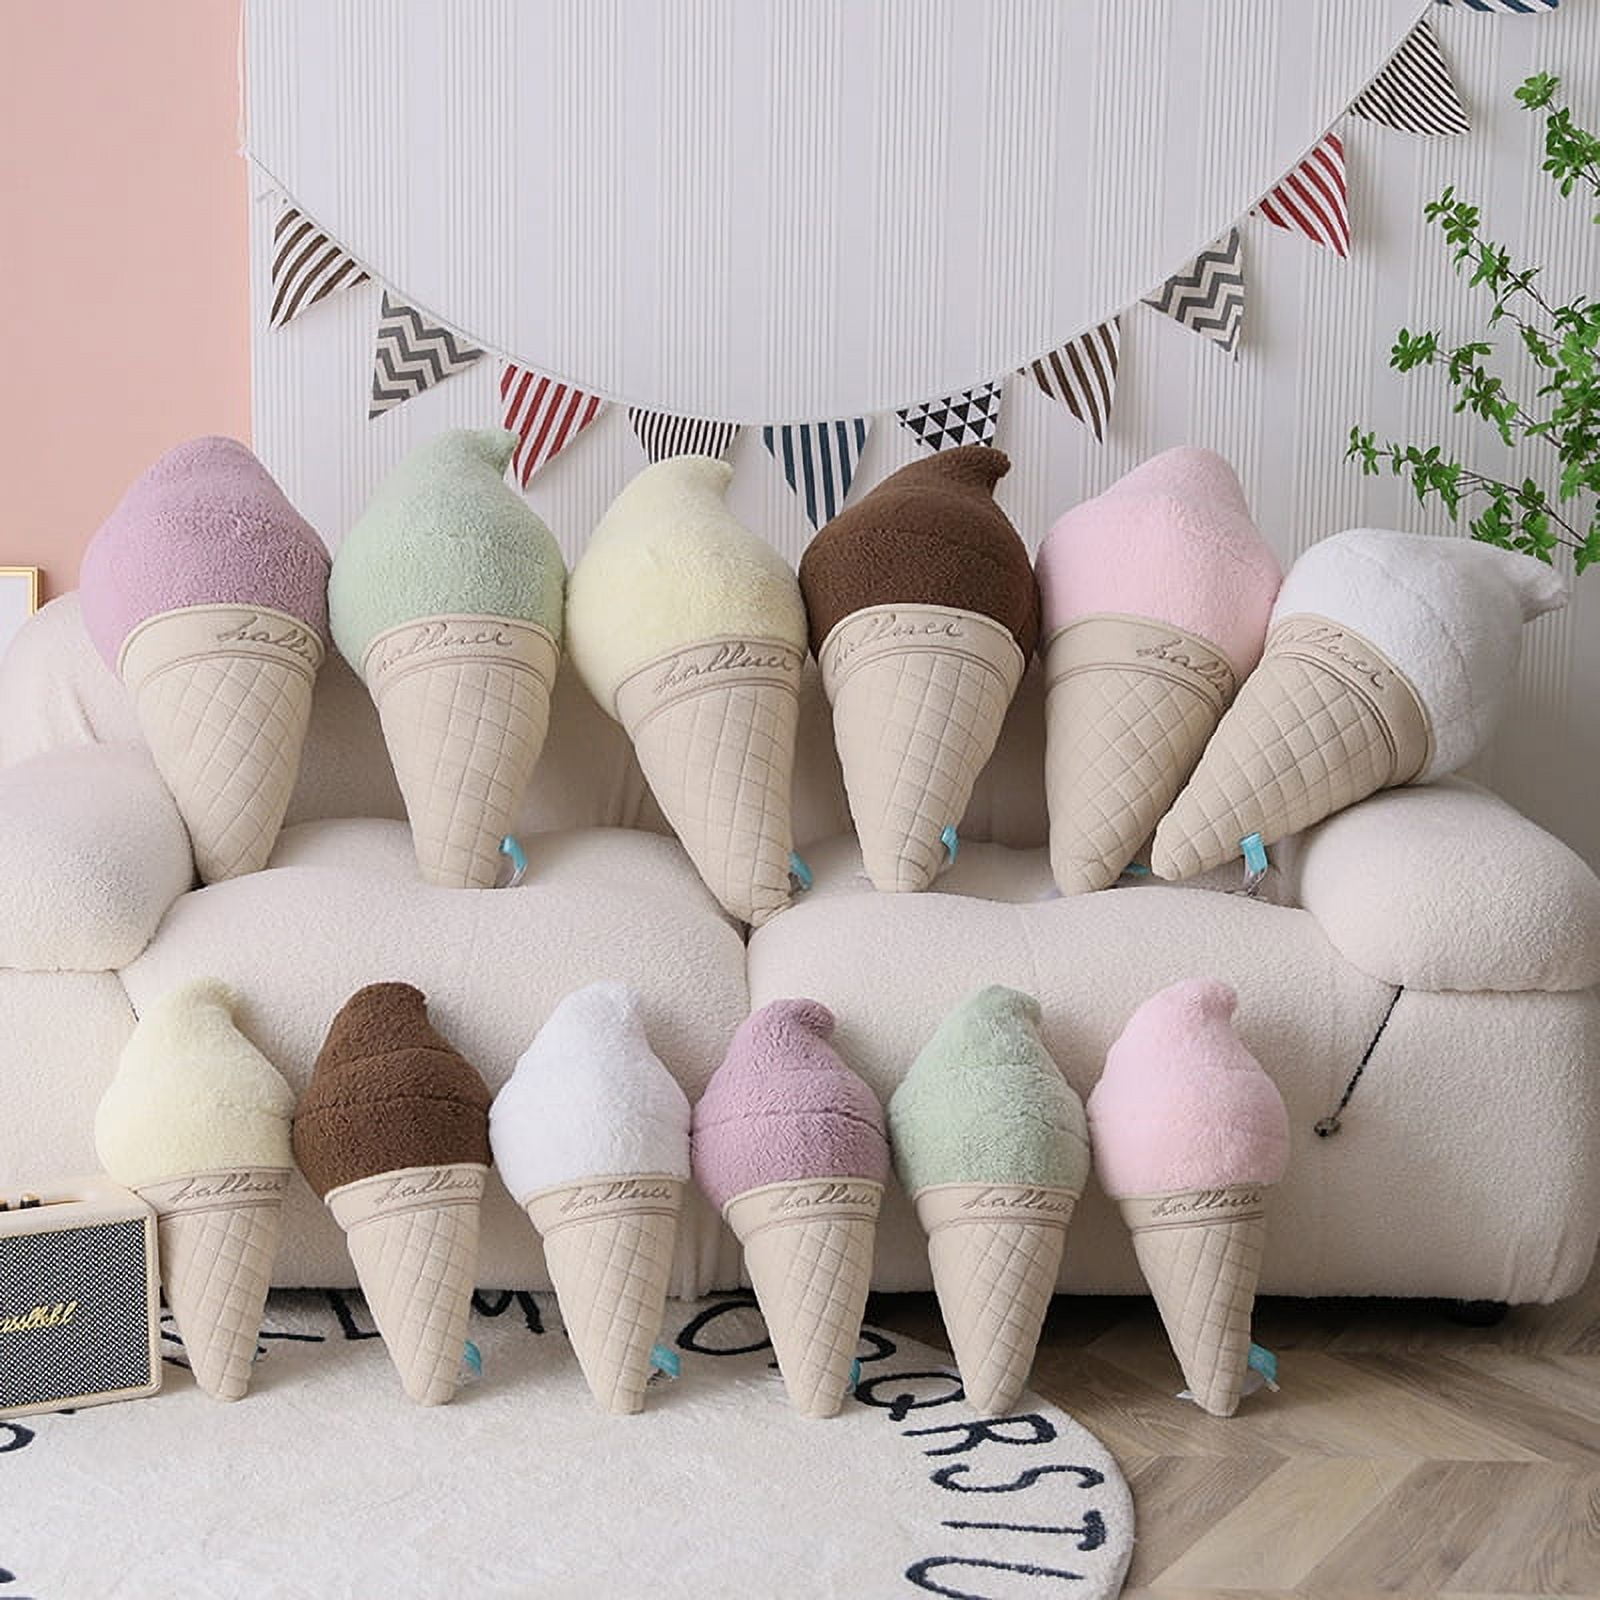 Icecream - Cone Pillow  HBX - Globally Curated Fashion and